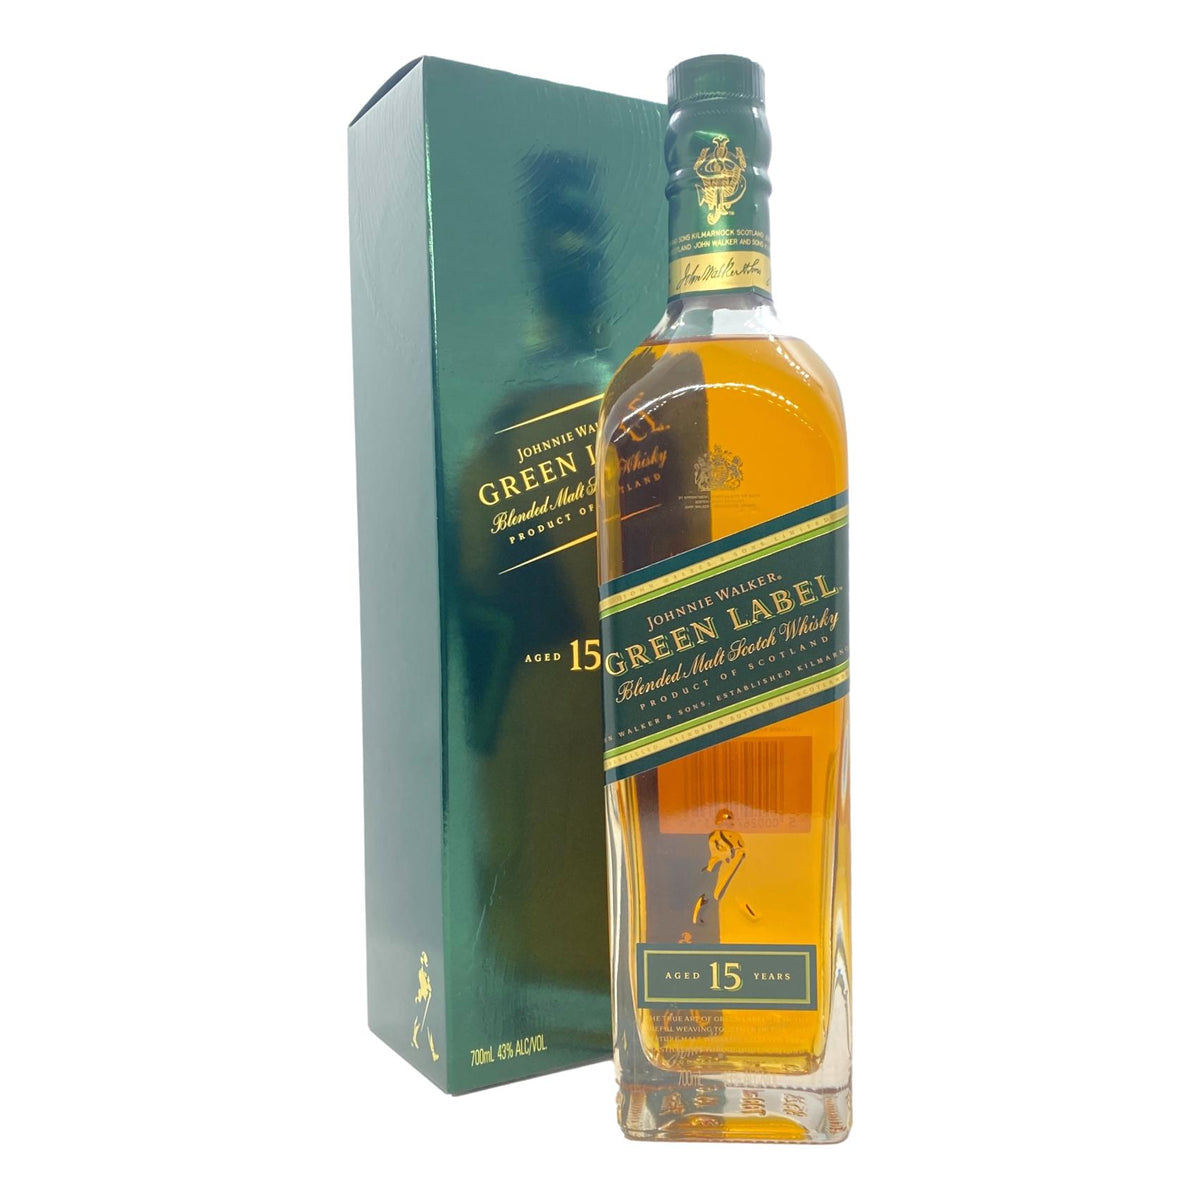 Johnnie Walker Green Label 15 Year Old (Discontinued) Blended Malt Scotch Whisky 700ml